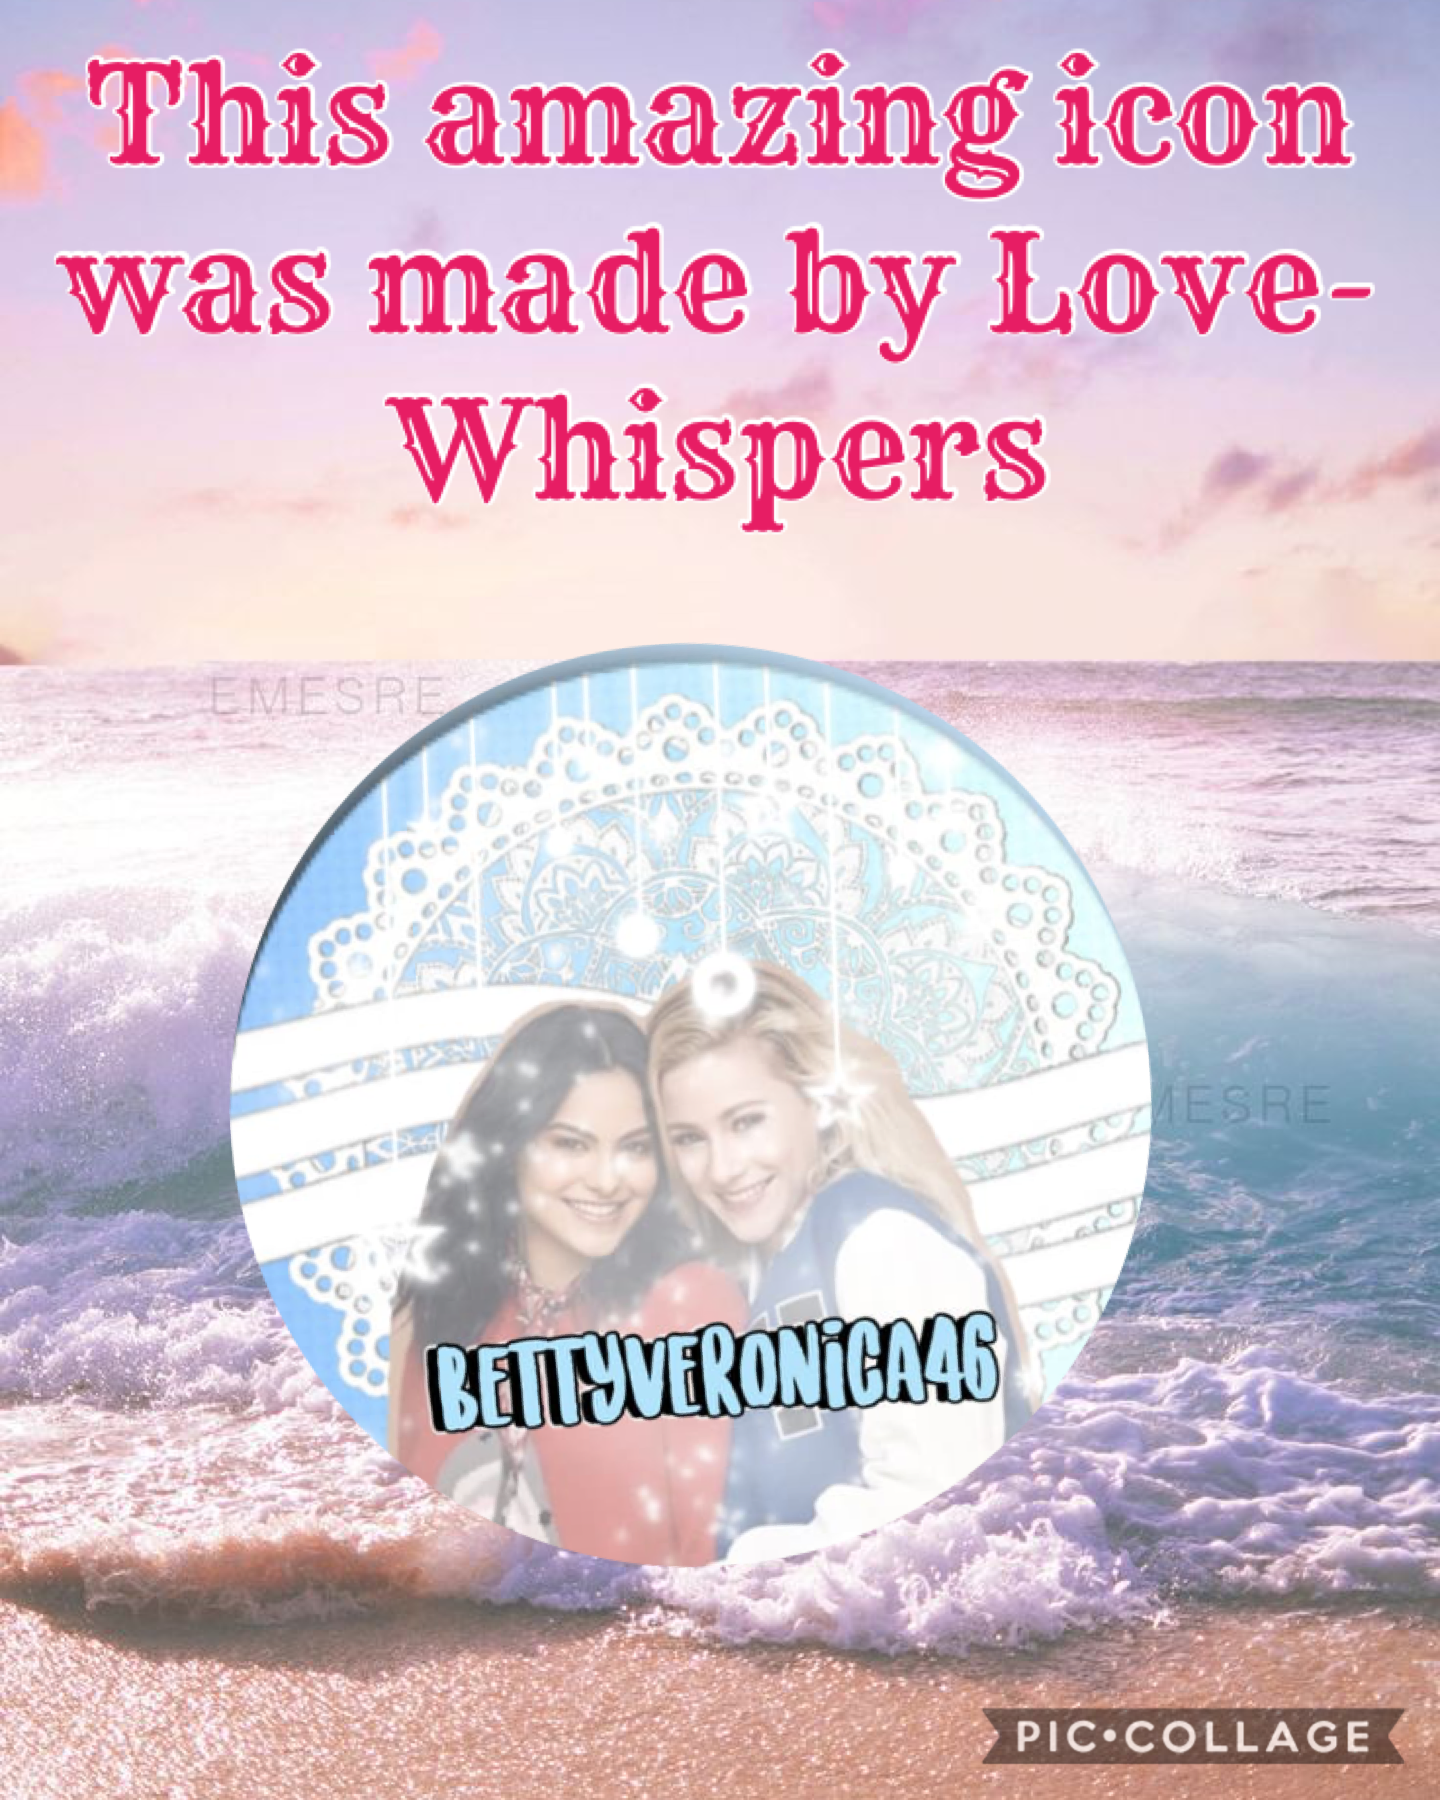 This amazing icon was made by Love-Whispers